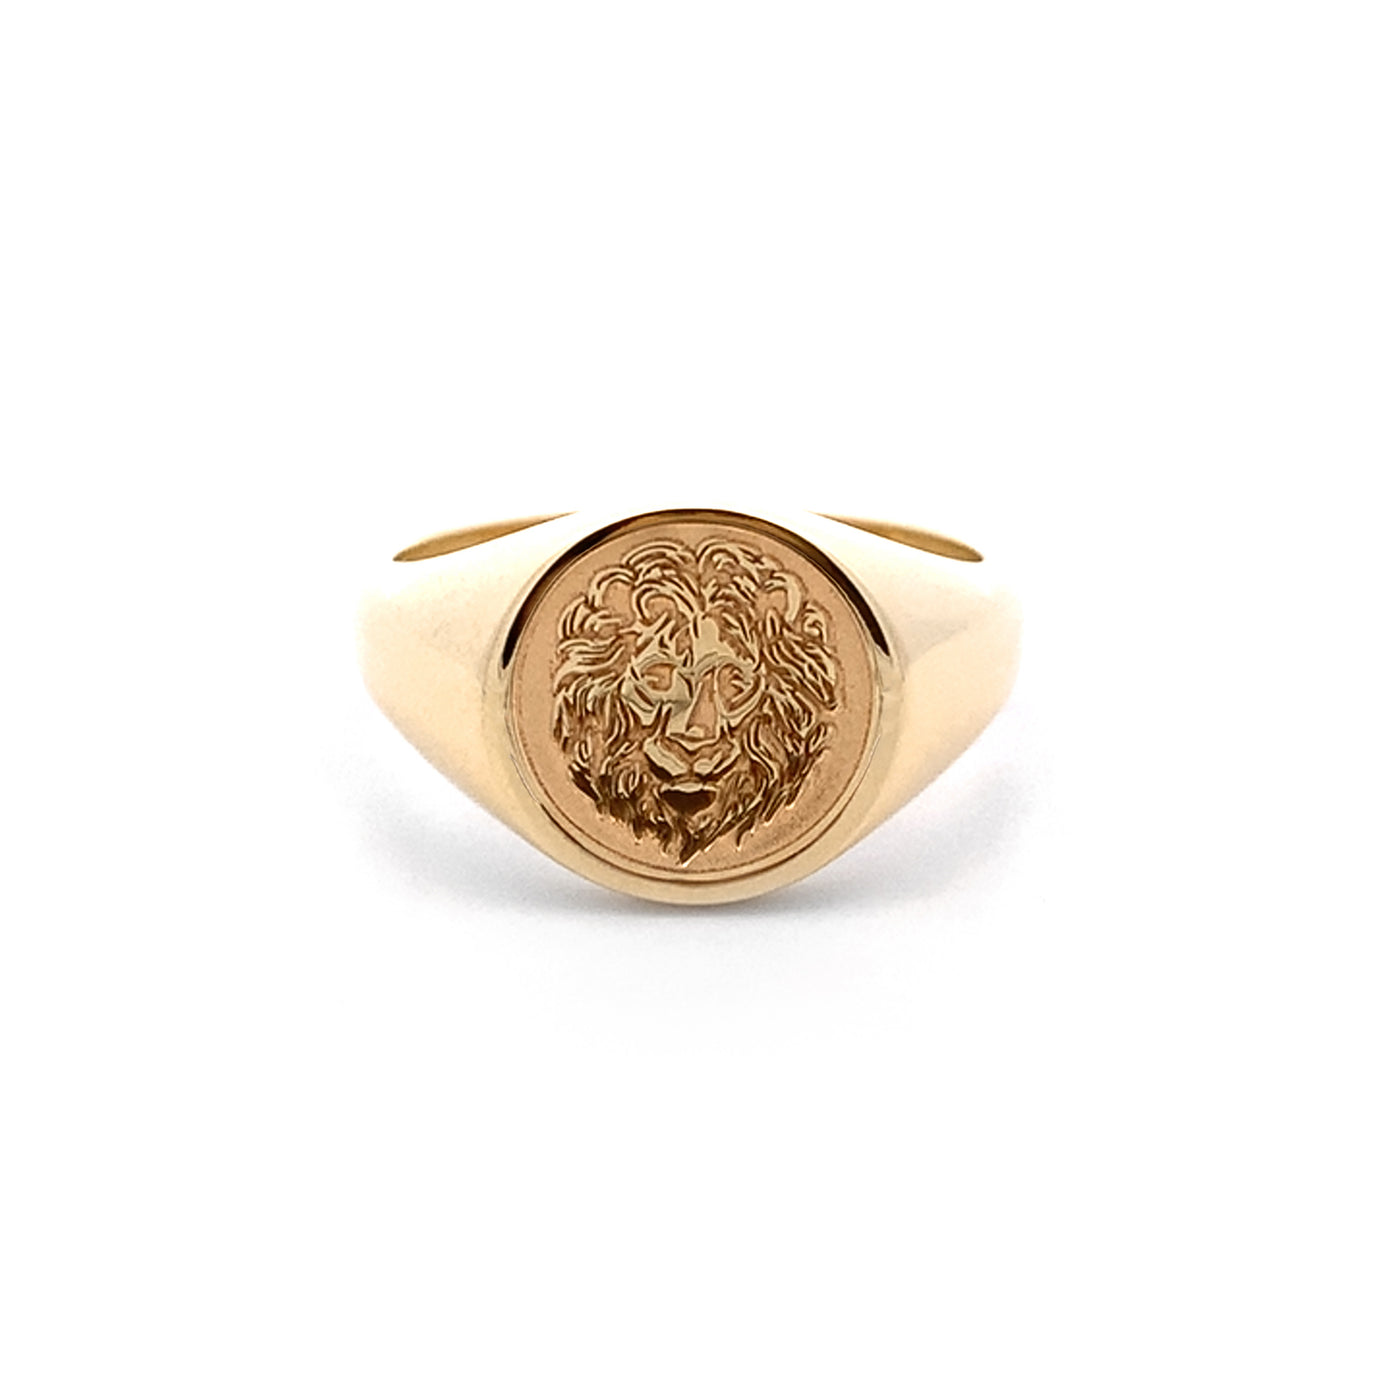 Lion Engraved Signet Ring in Yellow Gold